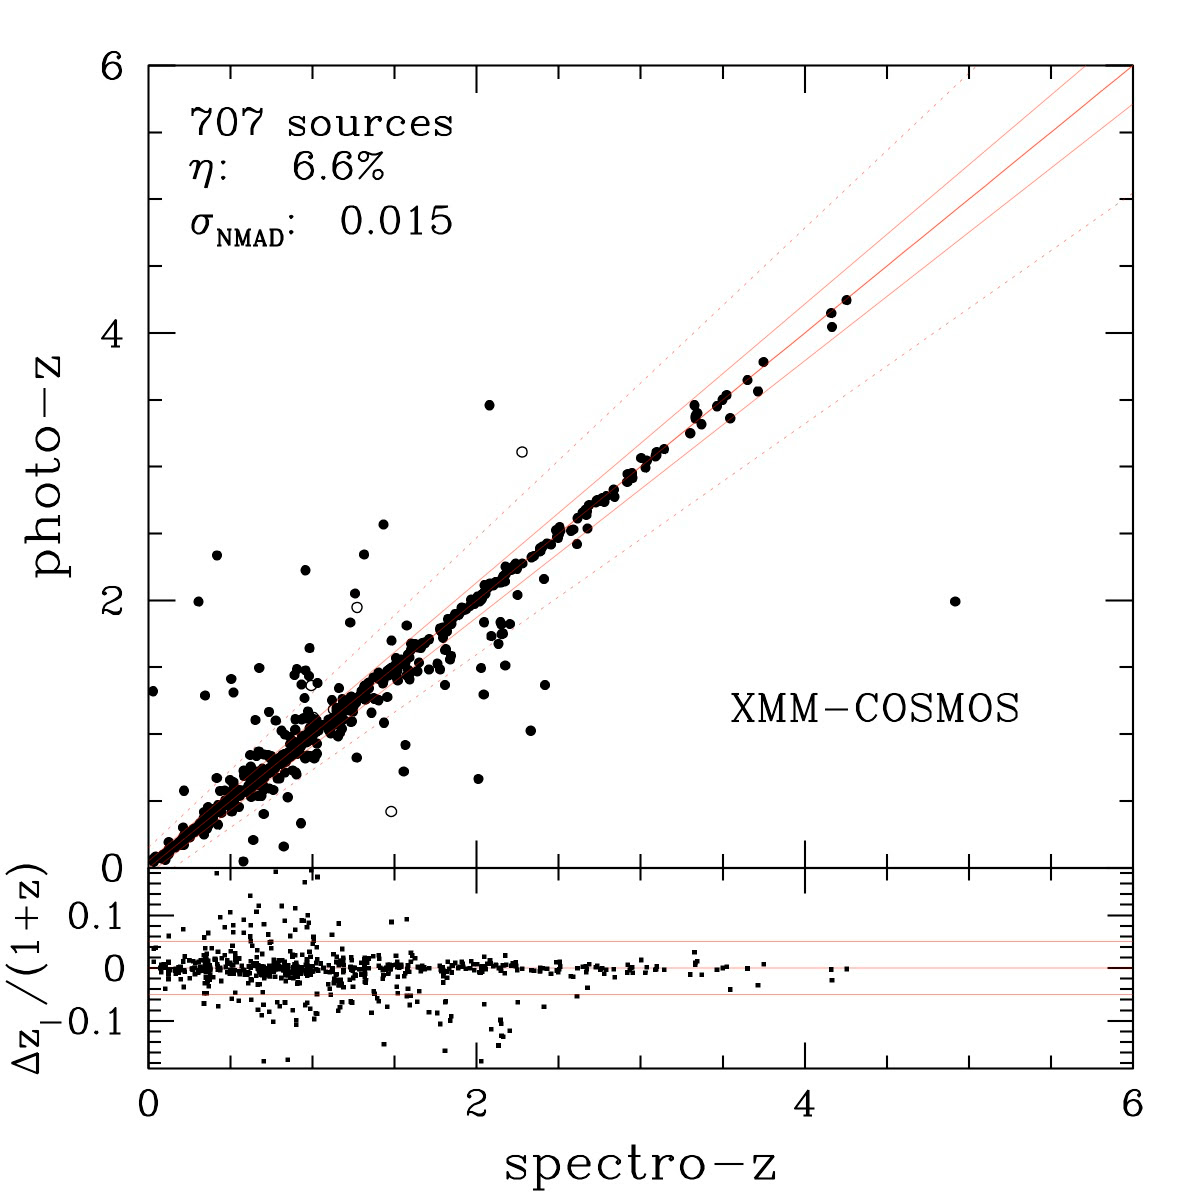 Final photometric versus spectroscopic redshifts for the entire XMM-COSMOS sample.